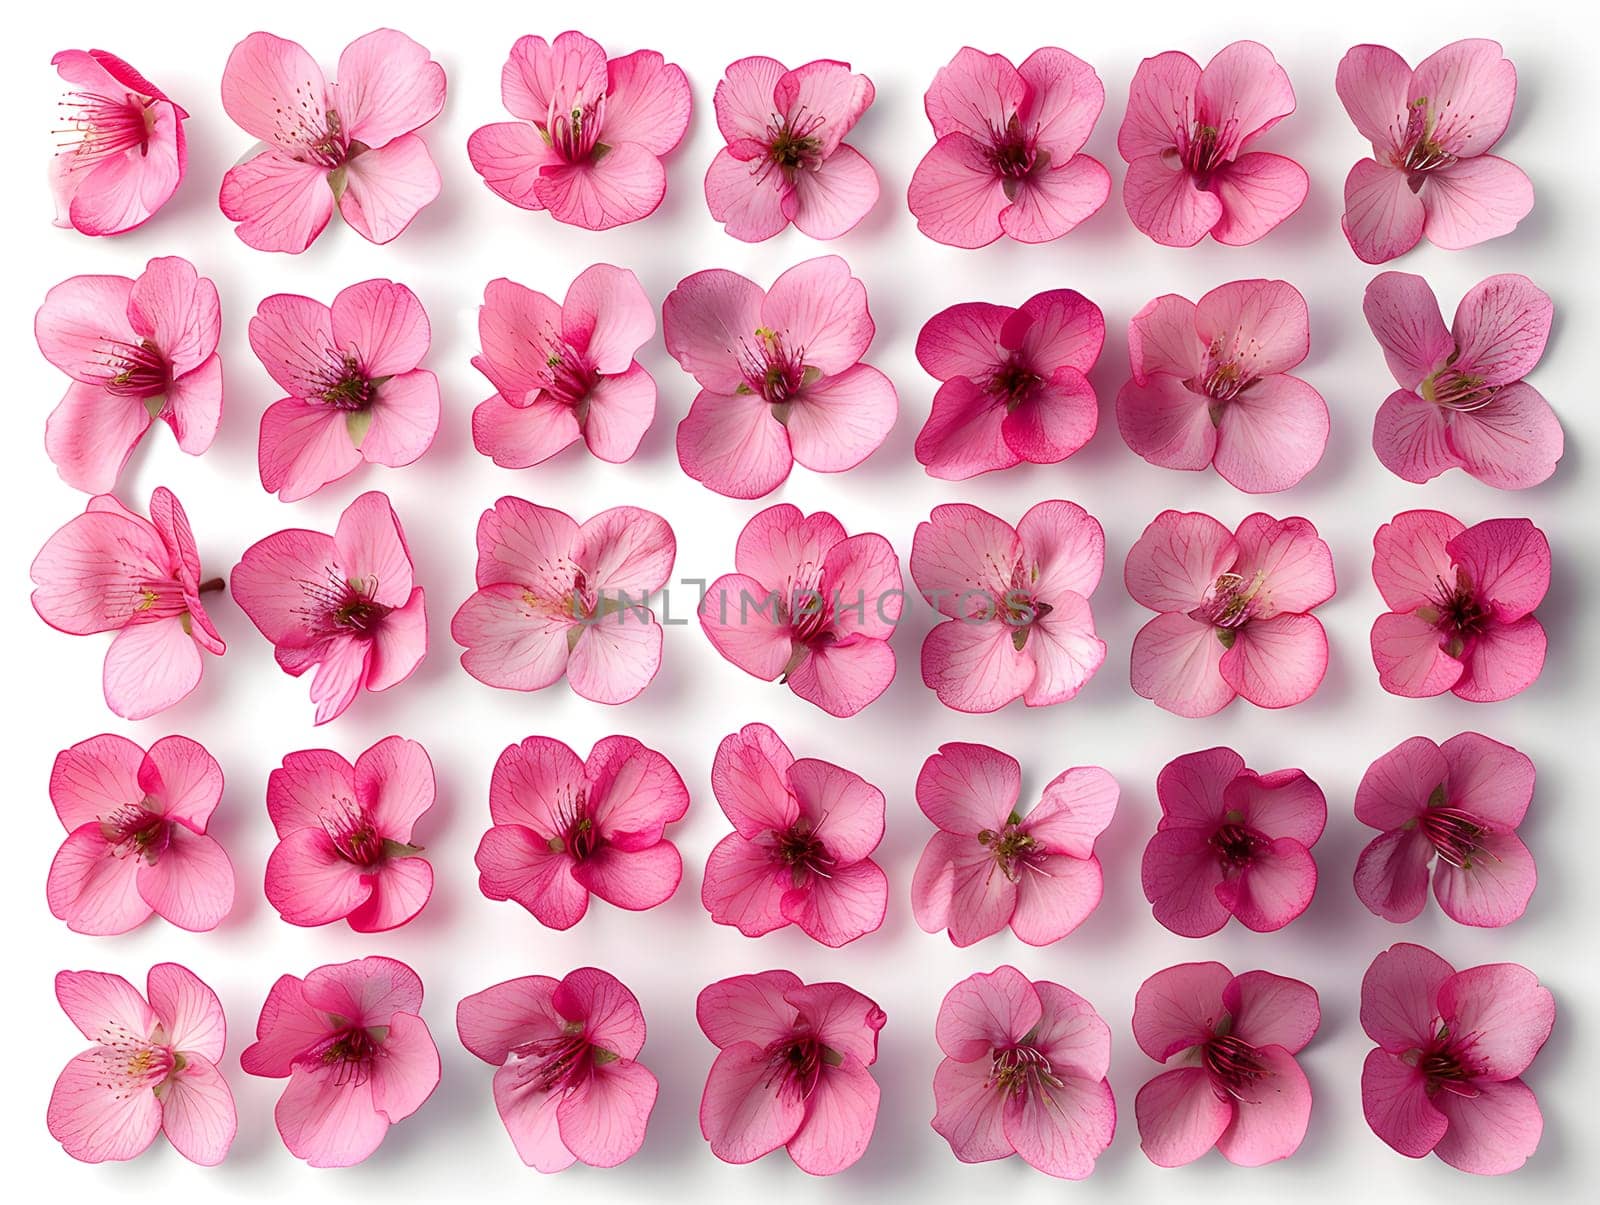 A pattern of pink, violet, and magenta petals on a white background by Nadtochiy